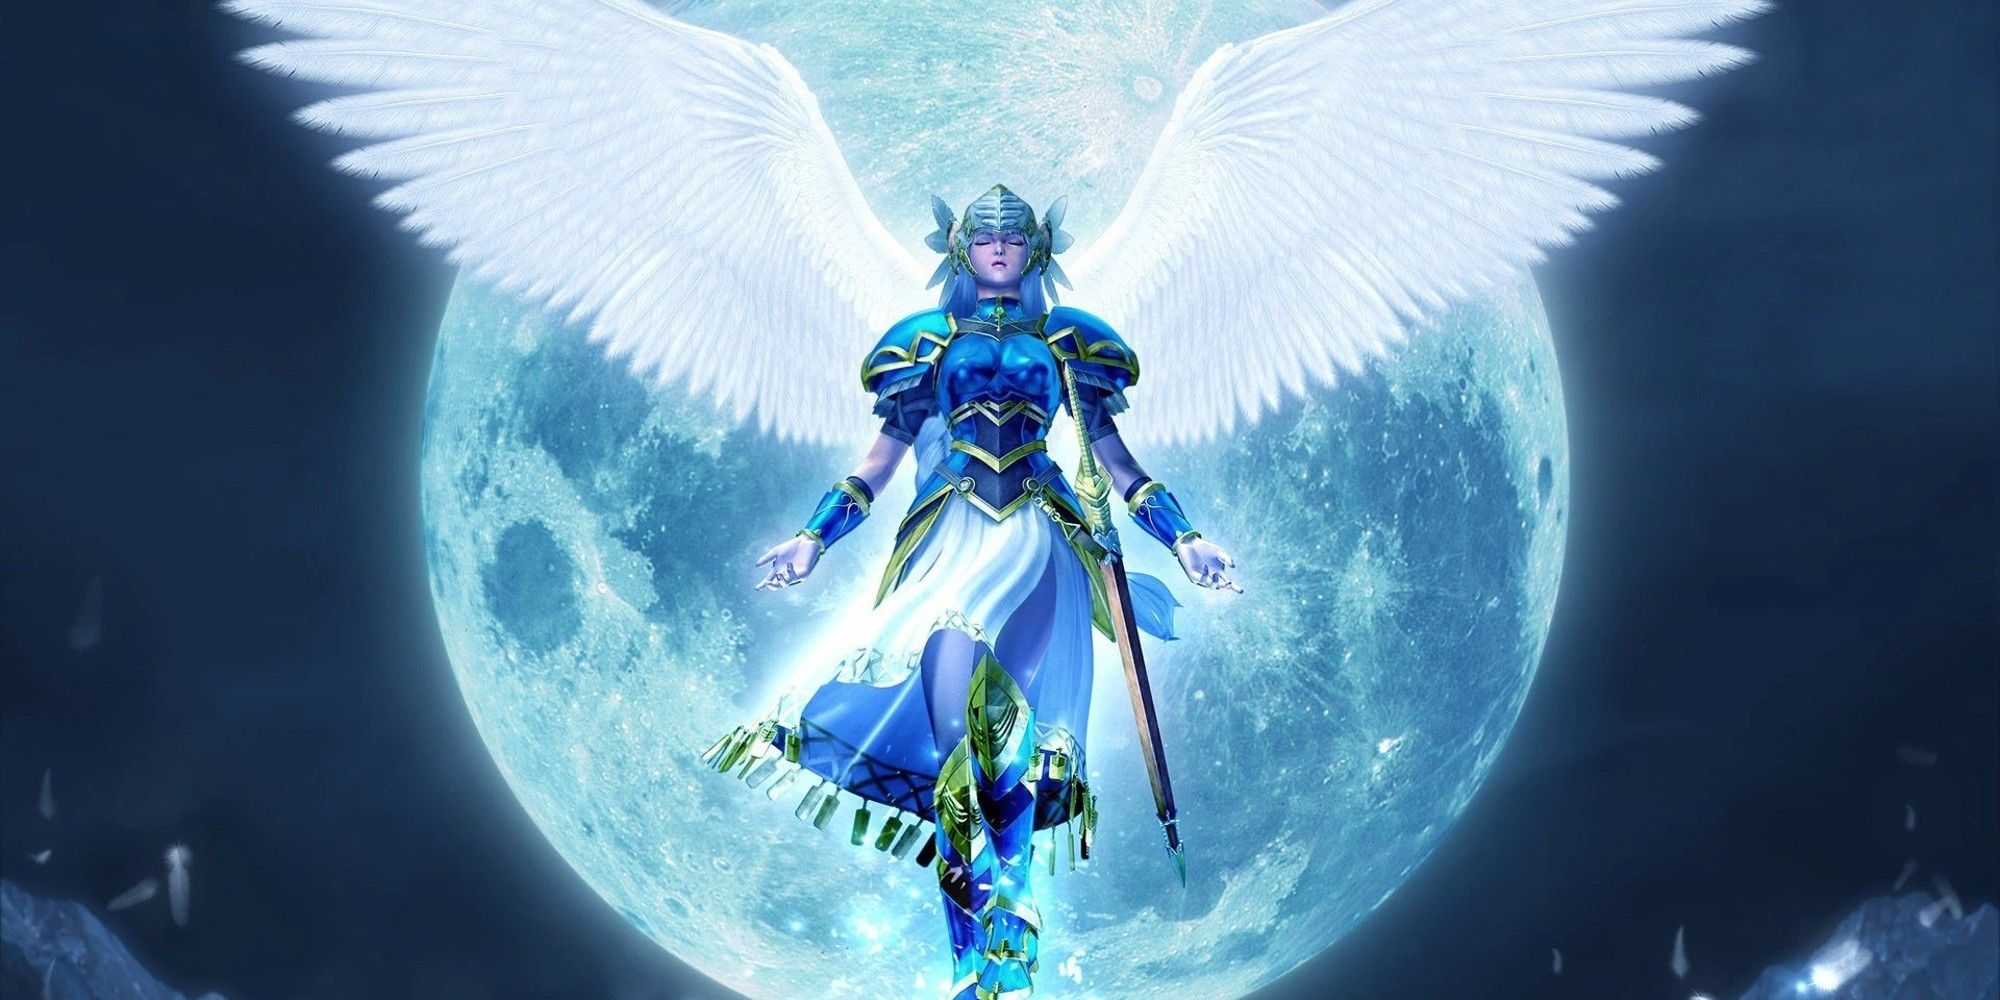 Lenneth Valkyrie profile - the power of battle maiden